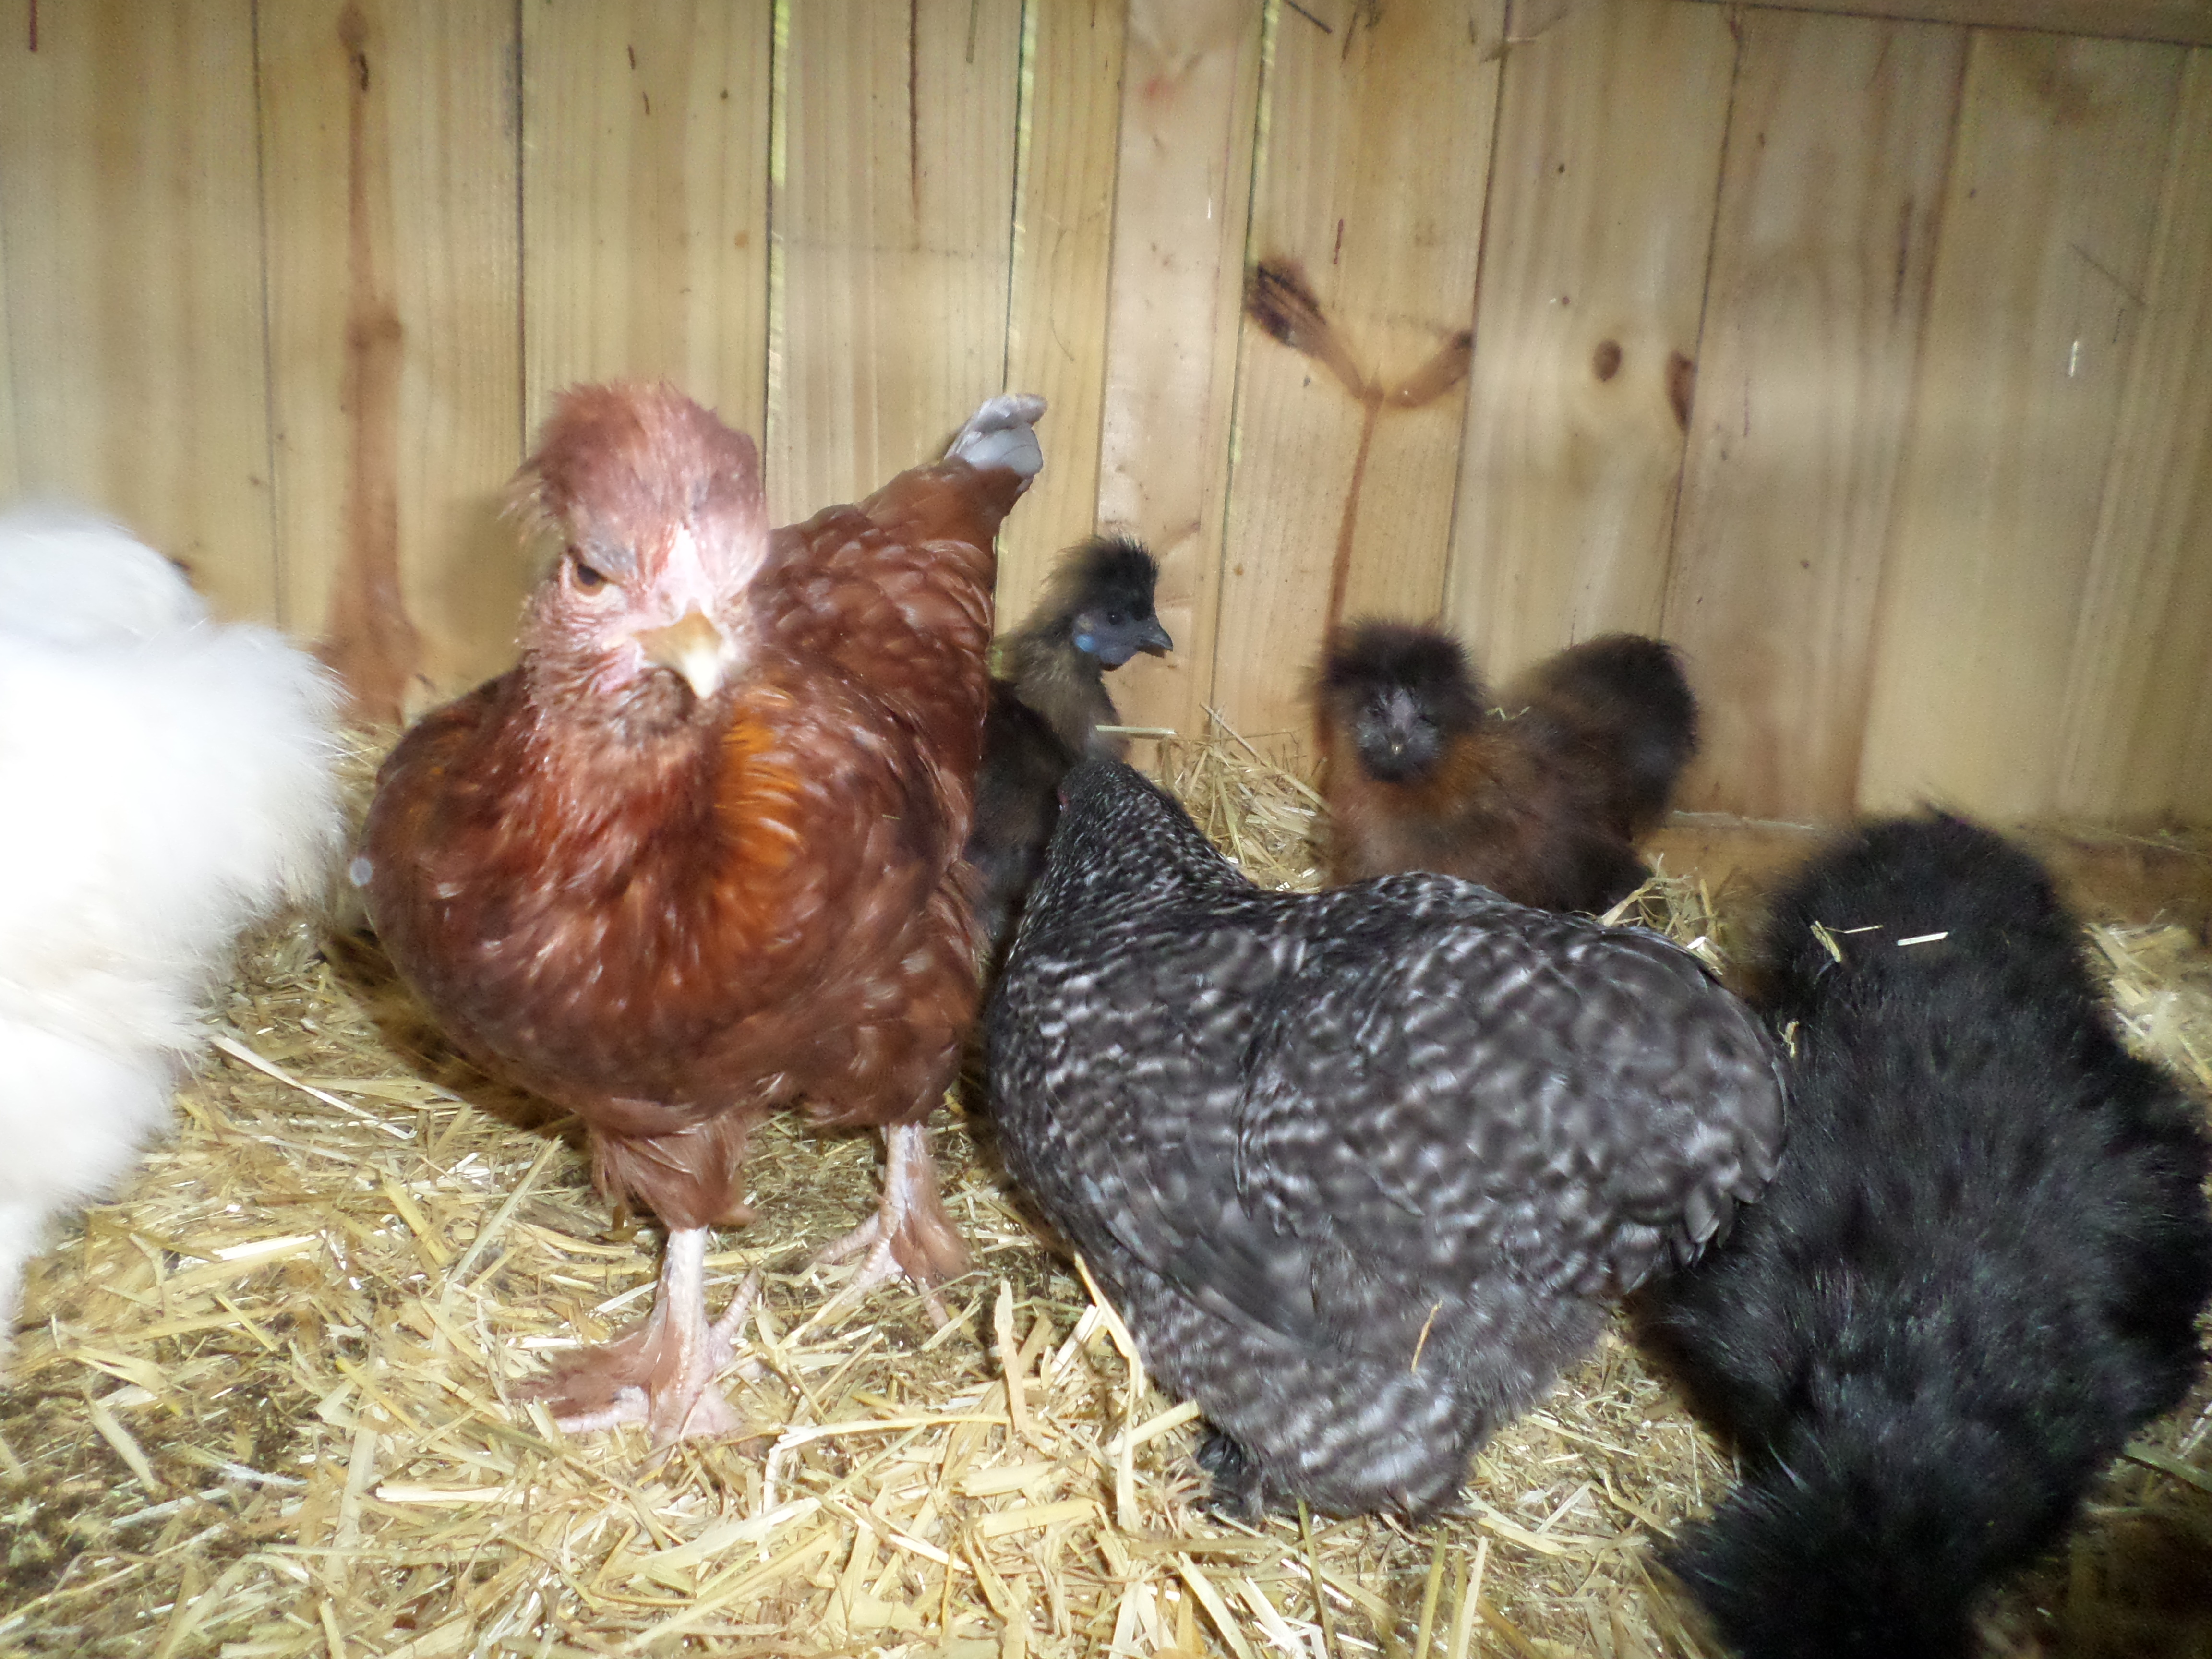 Some of my chickens